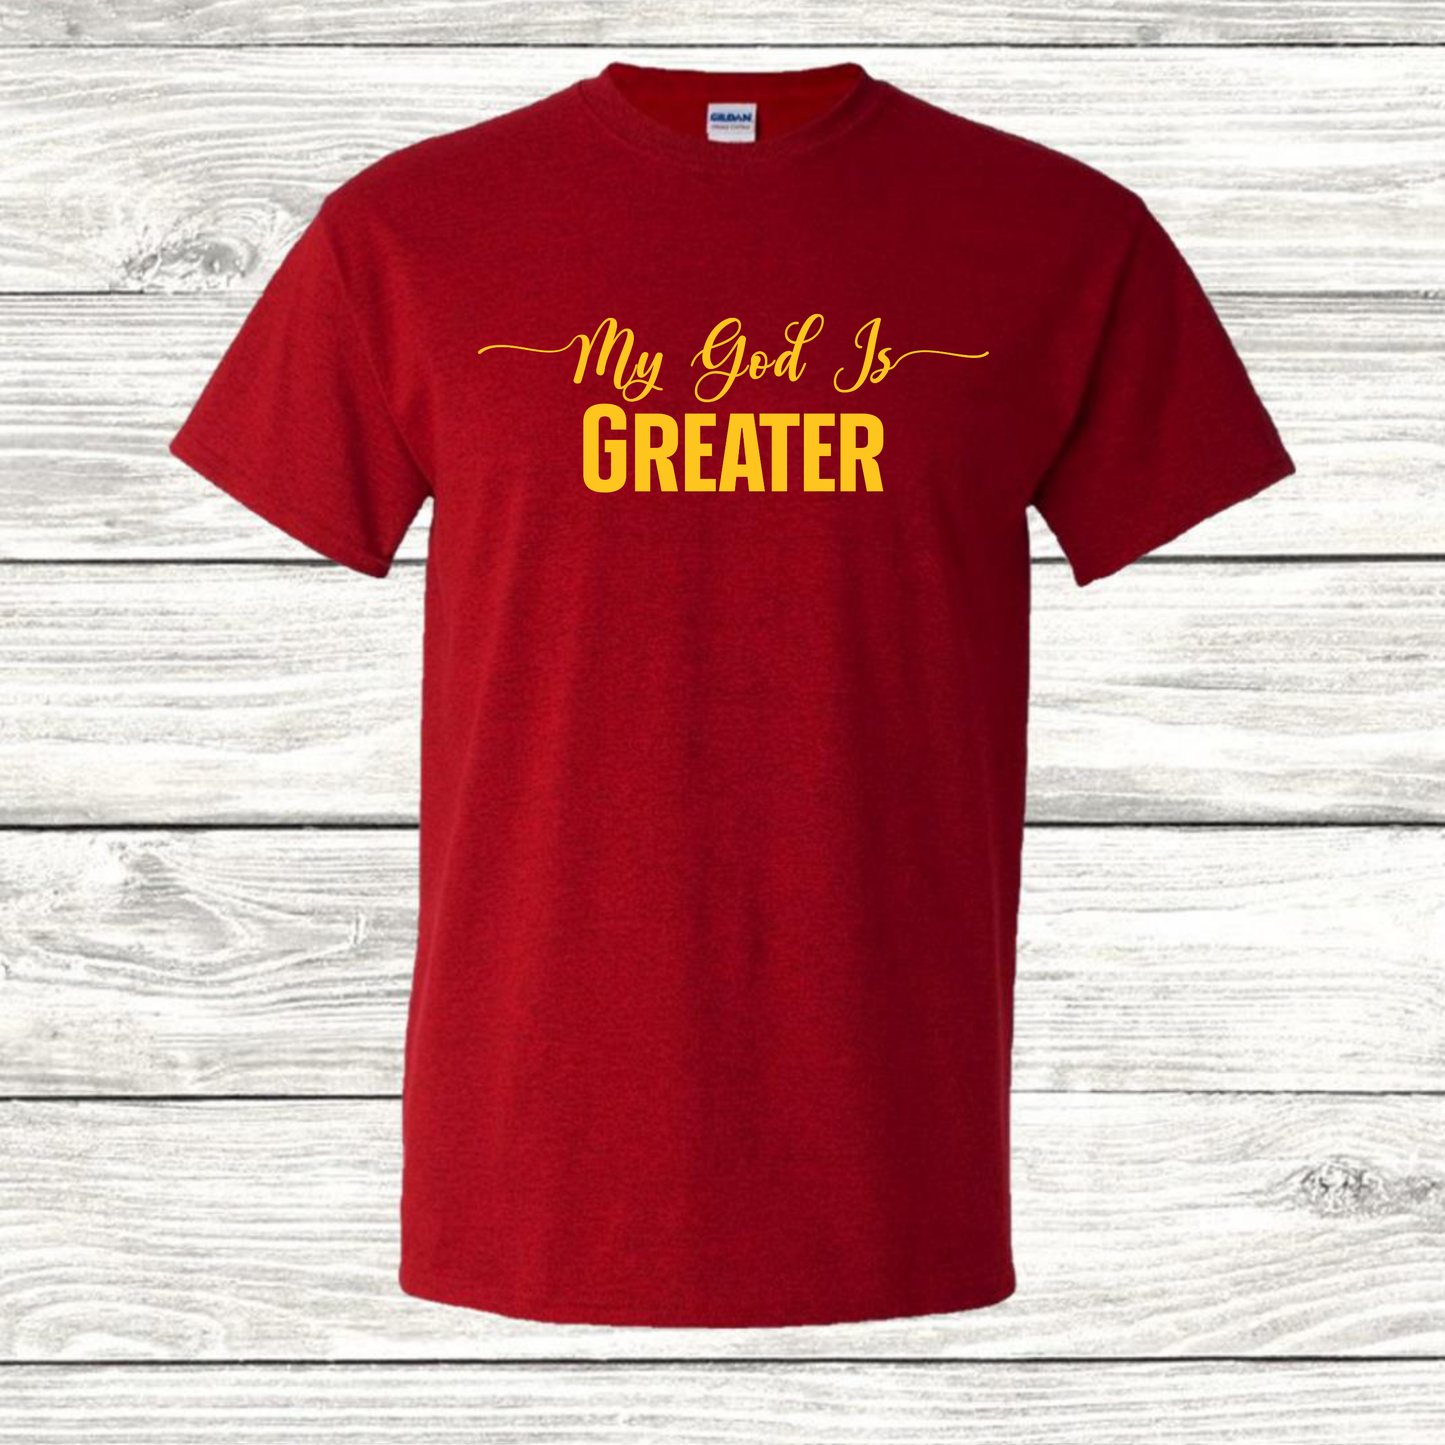 My God is Greater T-Shirt